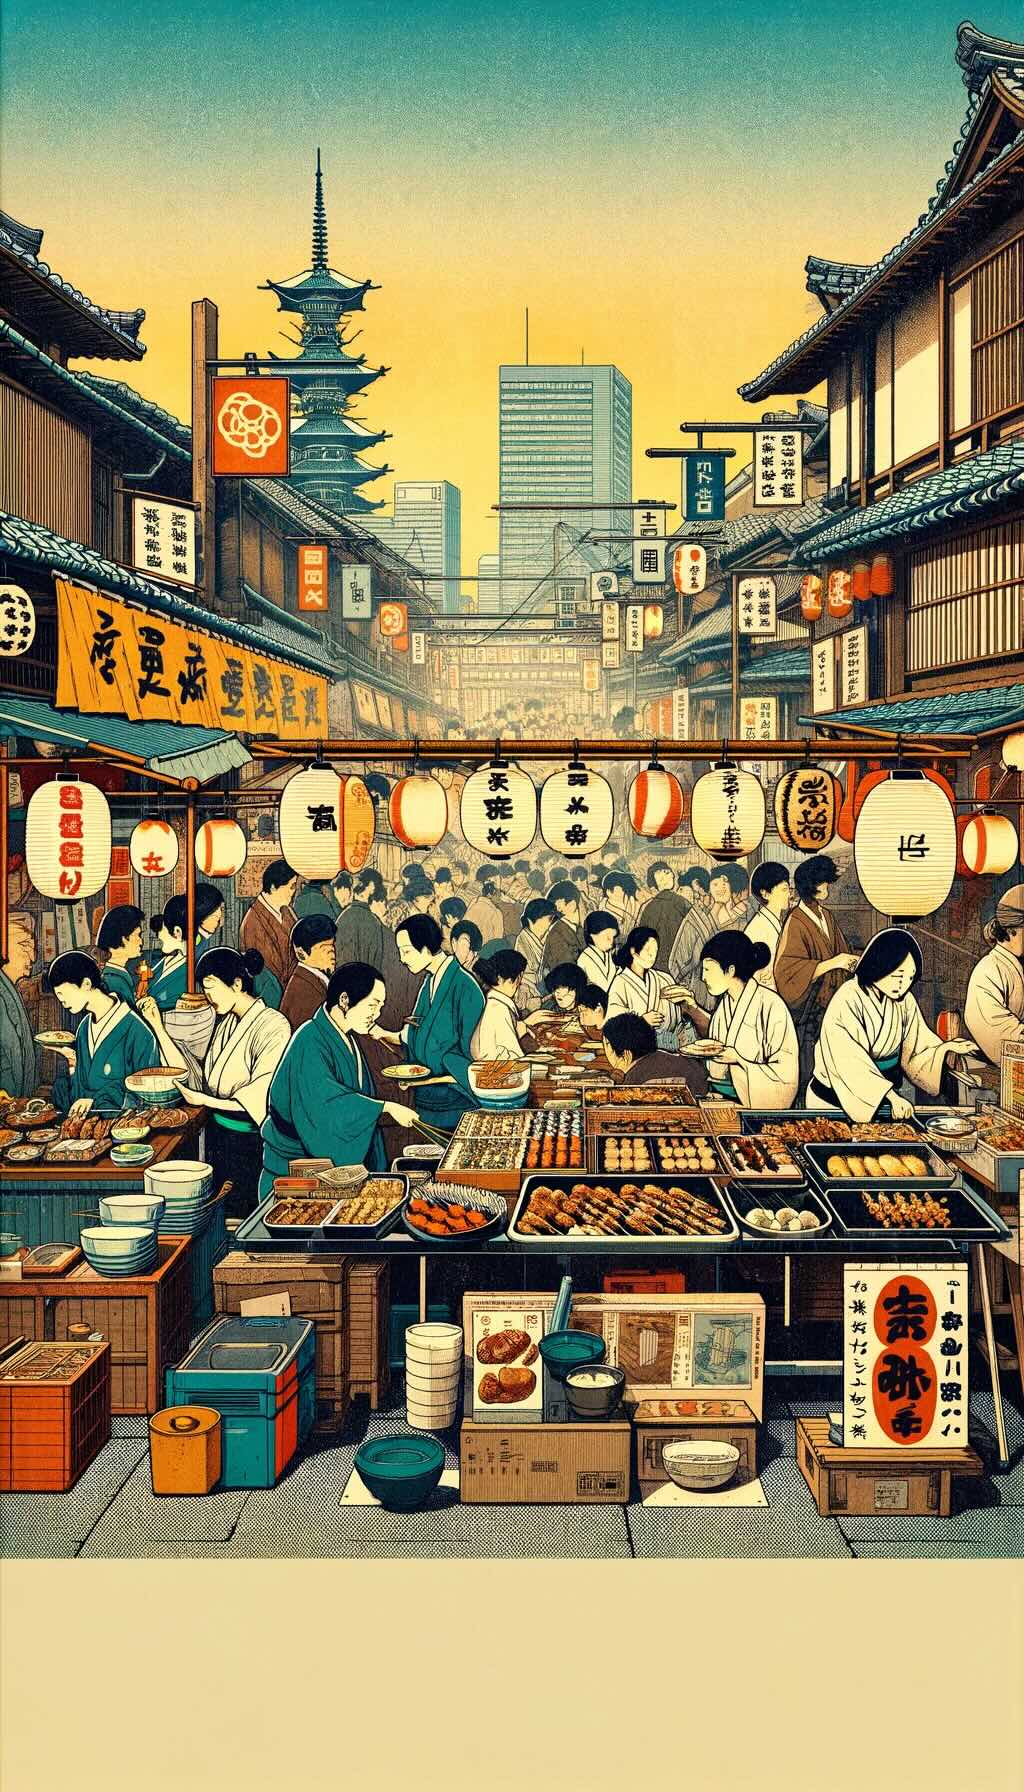 Osaka's street cuisine portrays the lively atmosphere of street food stalls and the communal spirit of the city, embodying the concept of 'kuidaore' - eating until you drop. The scene reflects Osaka's historical roots and its love for delicious, hearty food